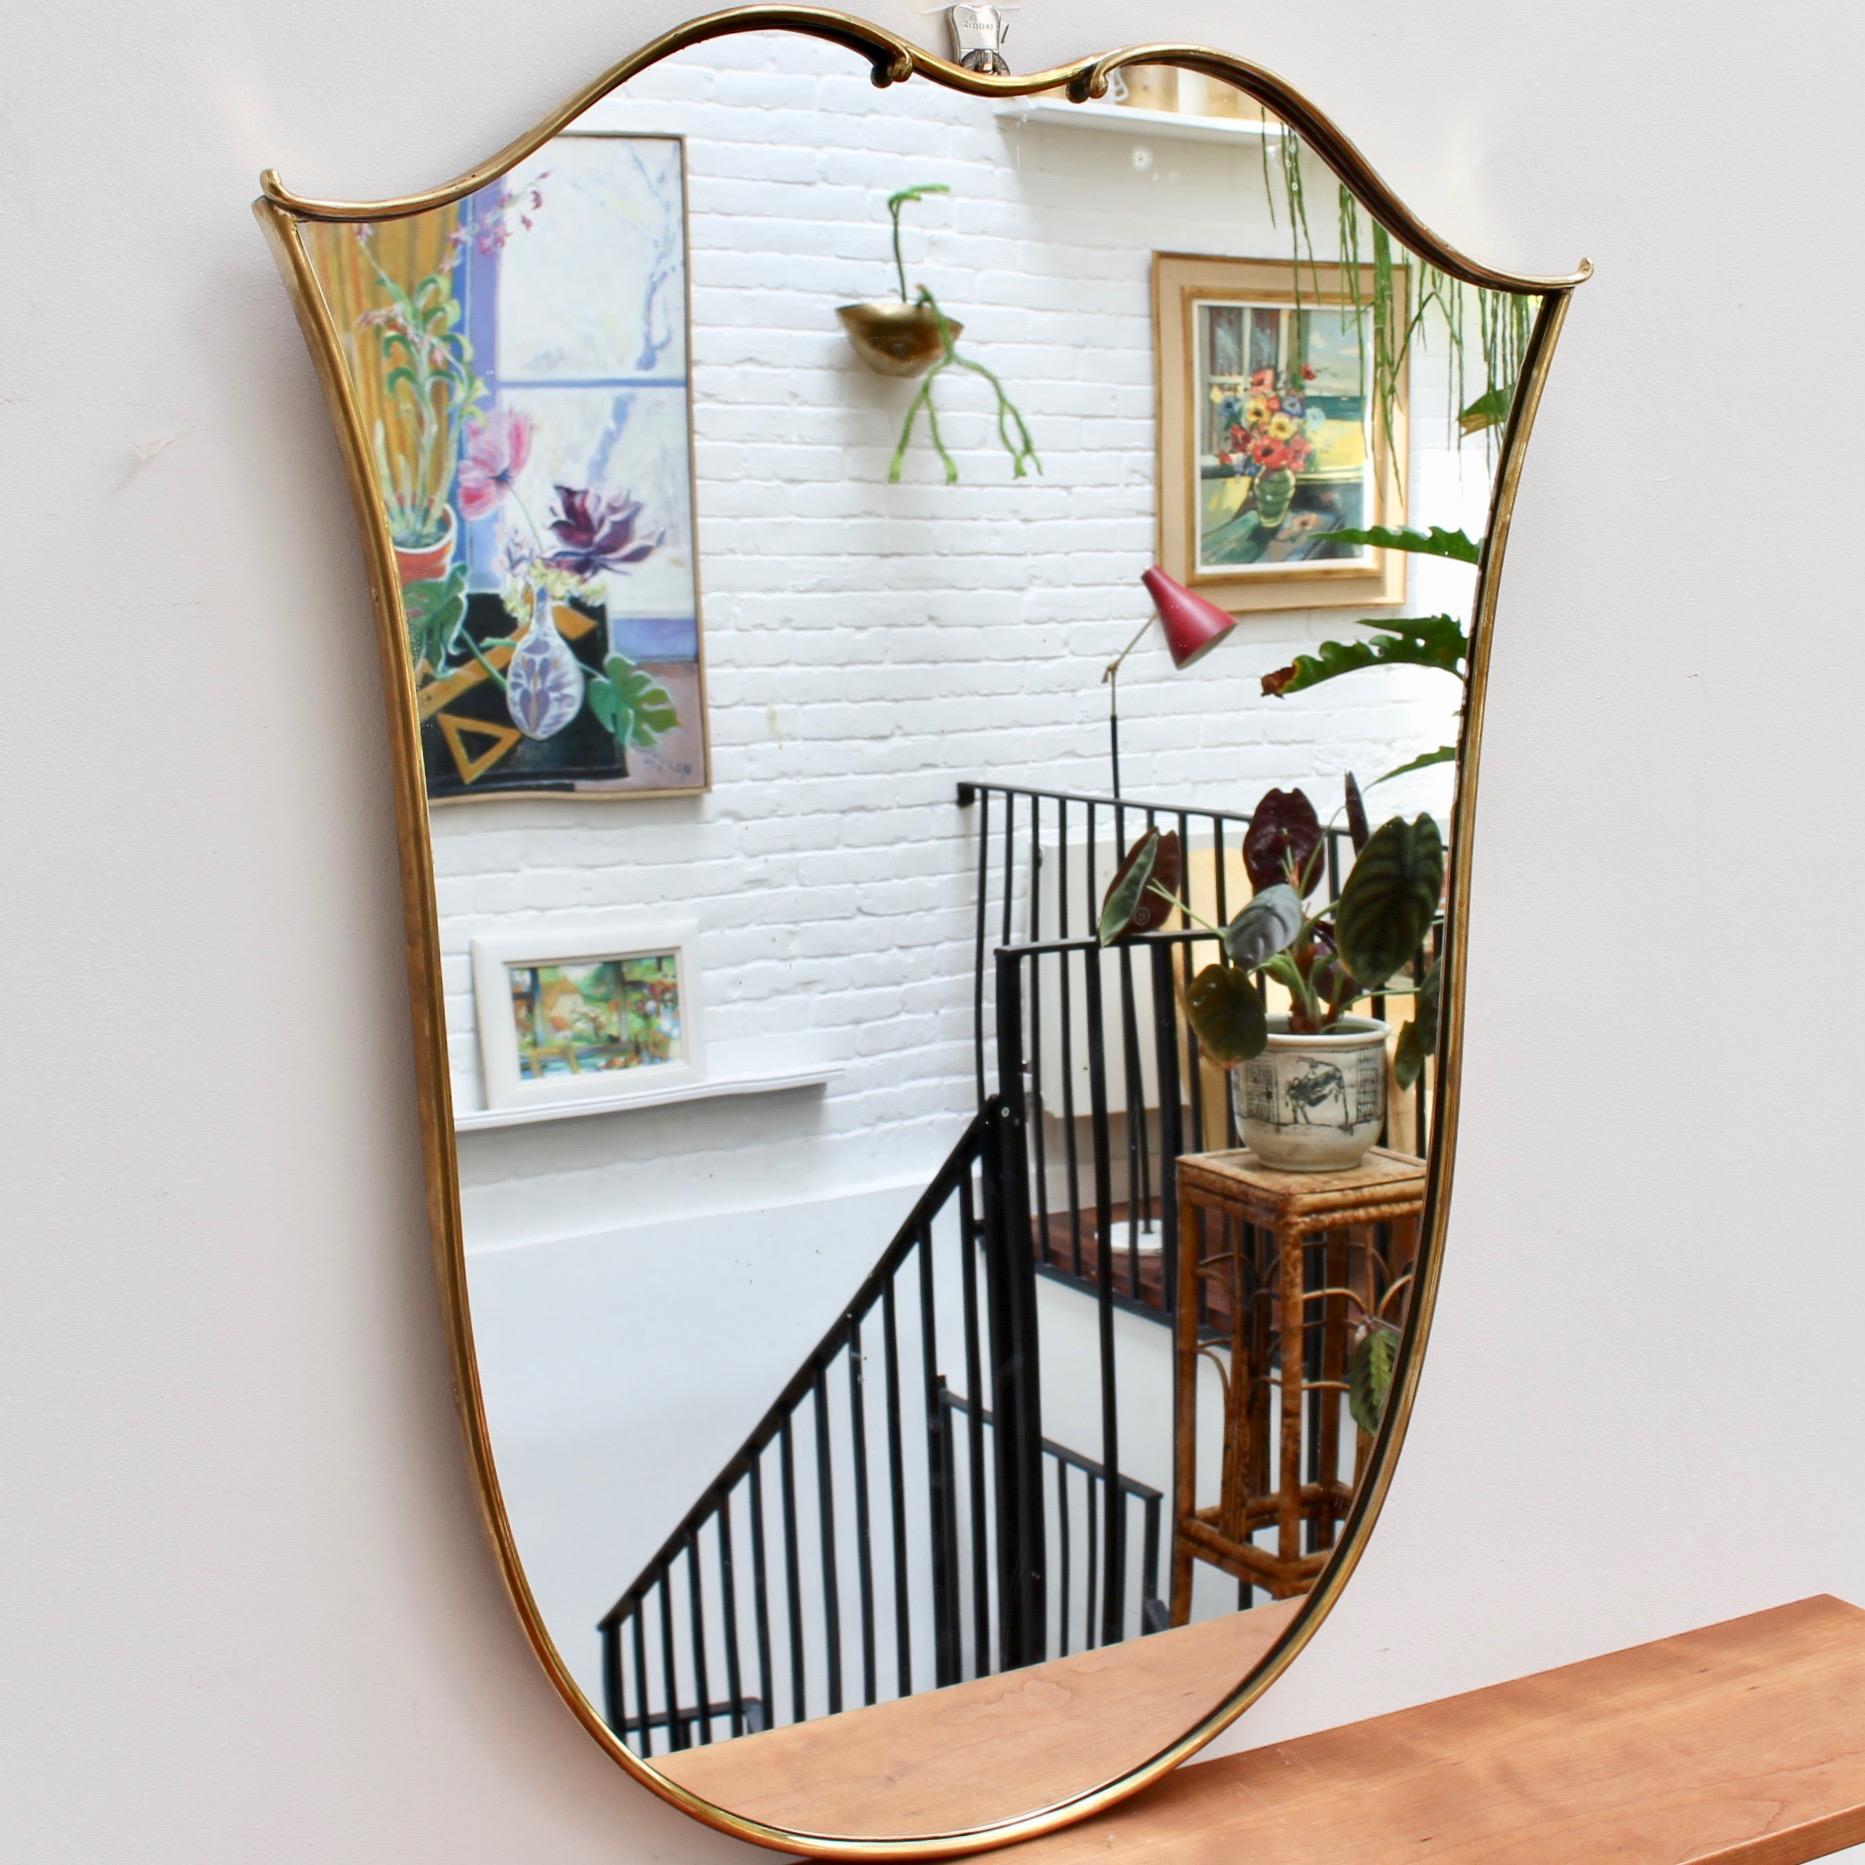 Midcentury Italian wall mirror with brass frame (circa 1950s). This mirror has sensuous curves yet retains its solidity and imposing good looks. The tulip-shape is topped with two special flourishes rarely found in this style of mirror. It is in